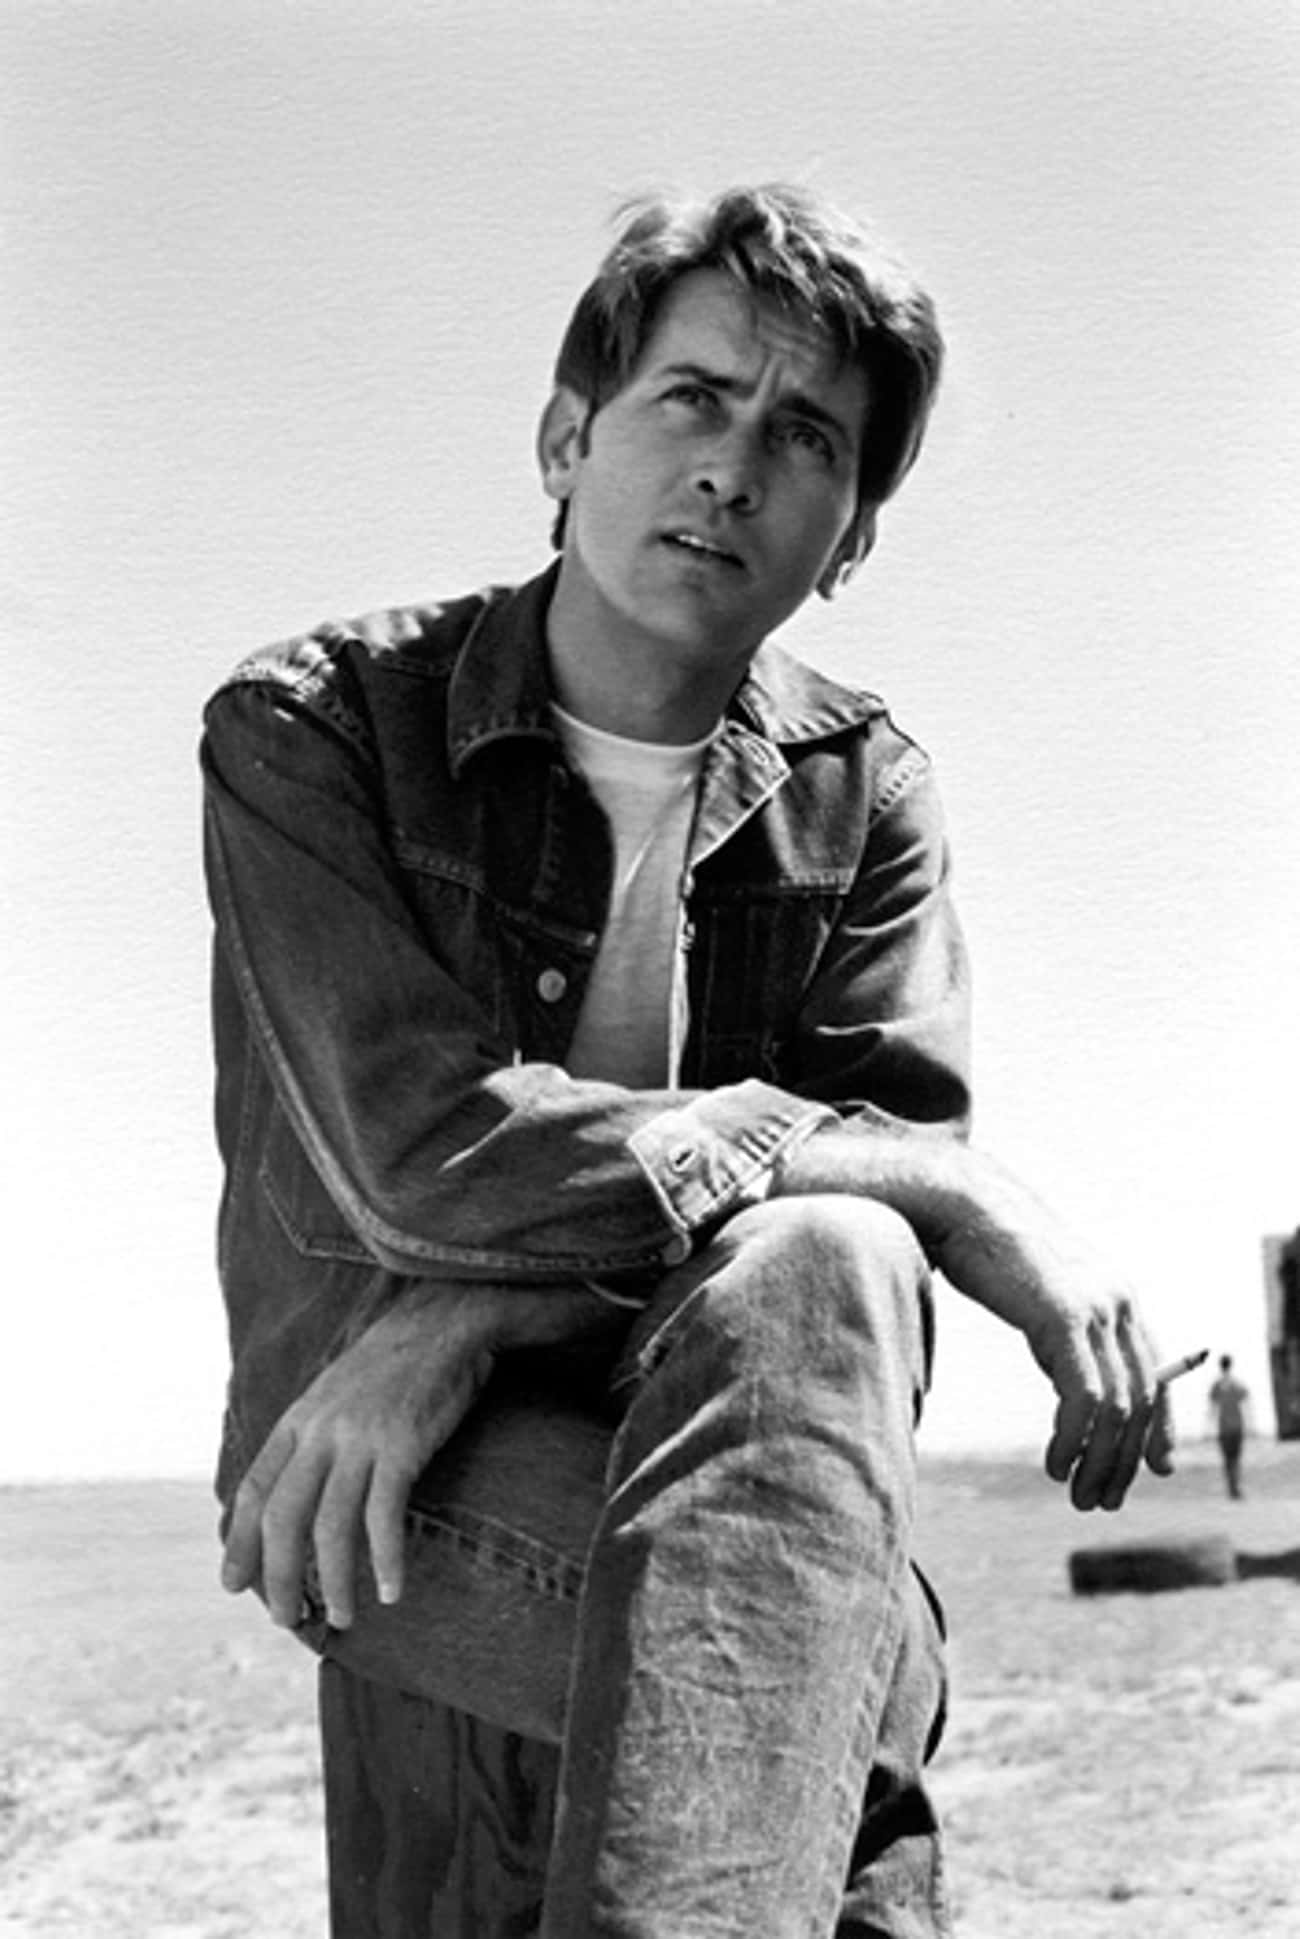 Young Martin Sheen Sitting on Tree Stump